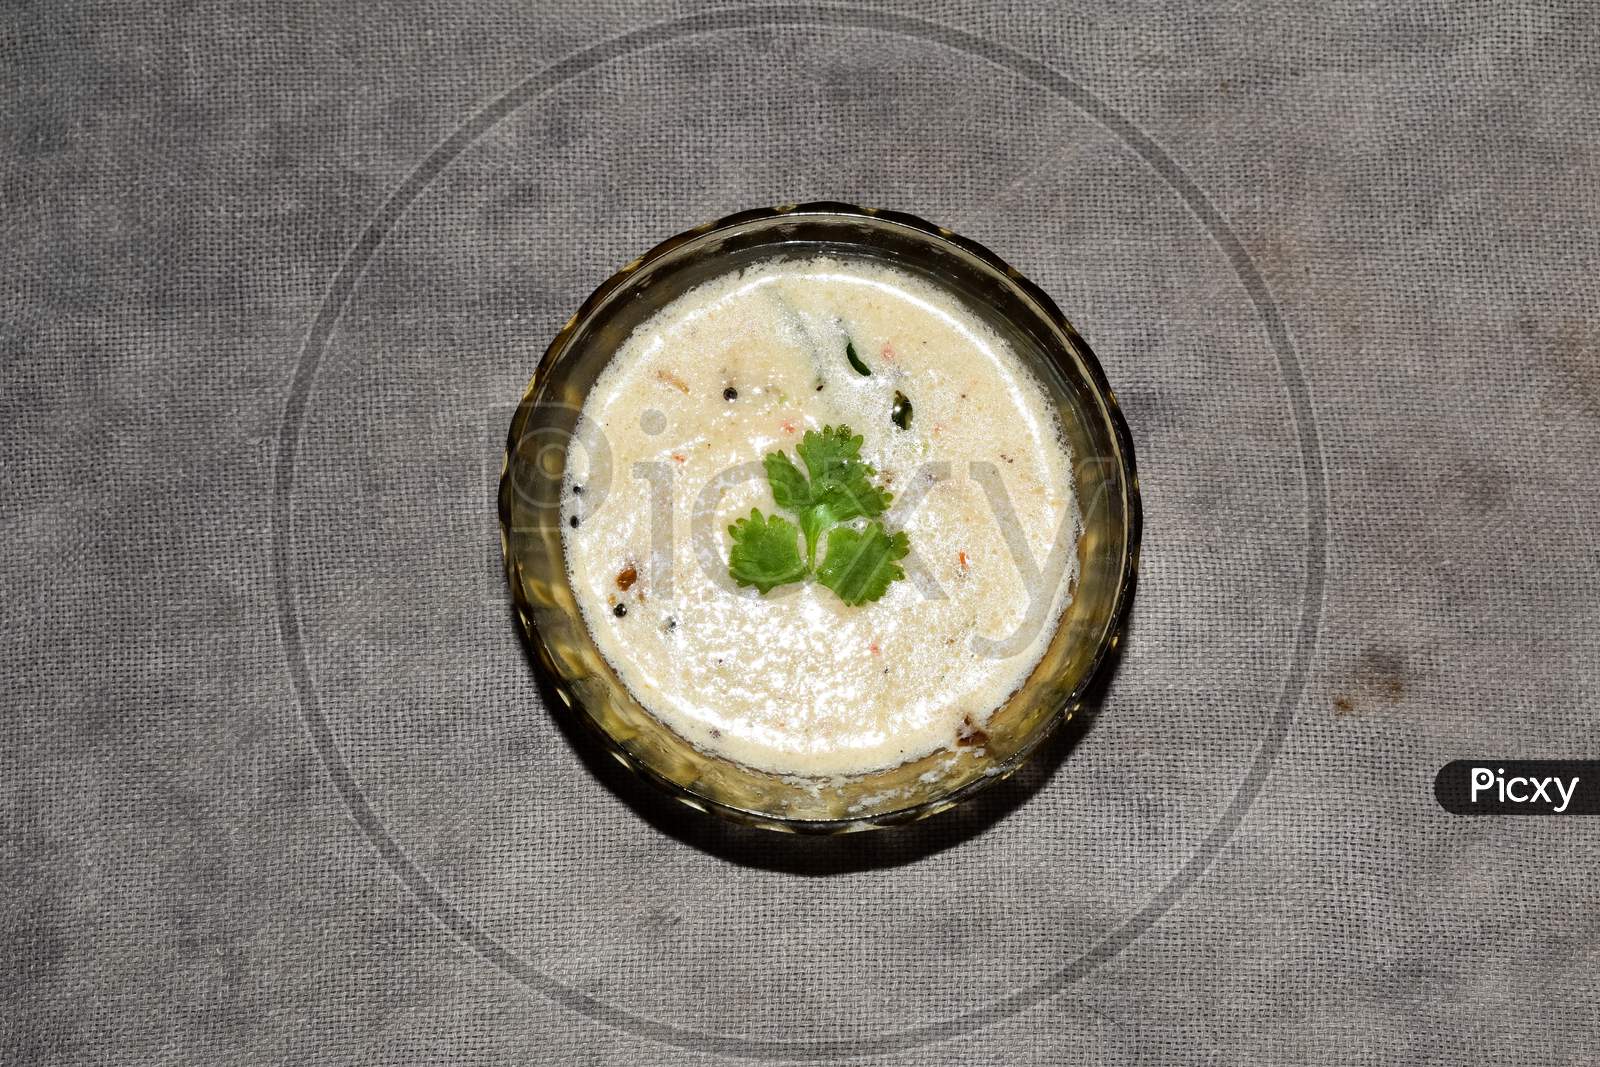 South Indian Cuisine - White Coconut Chutney Served In A Glass Bowl.